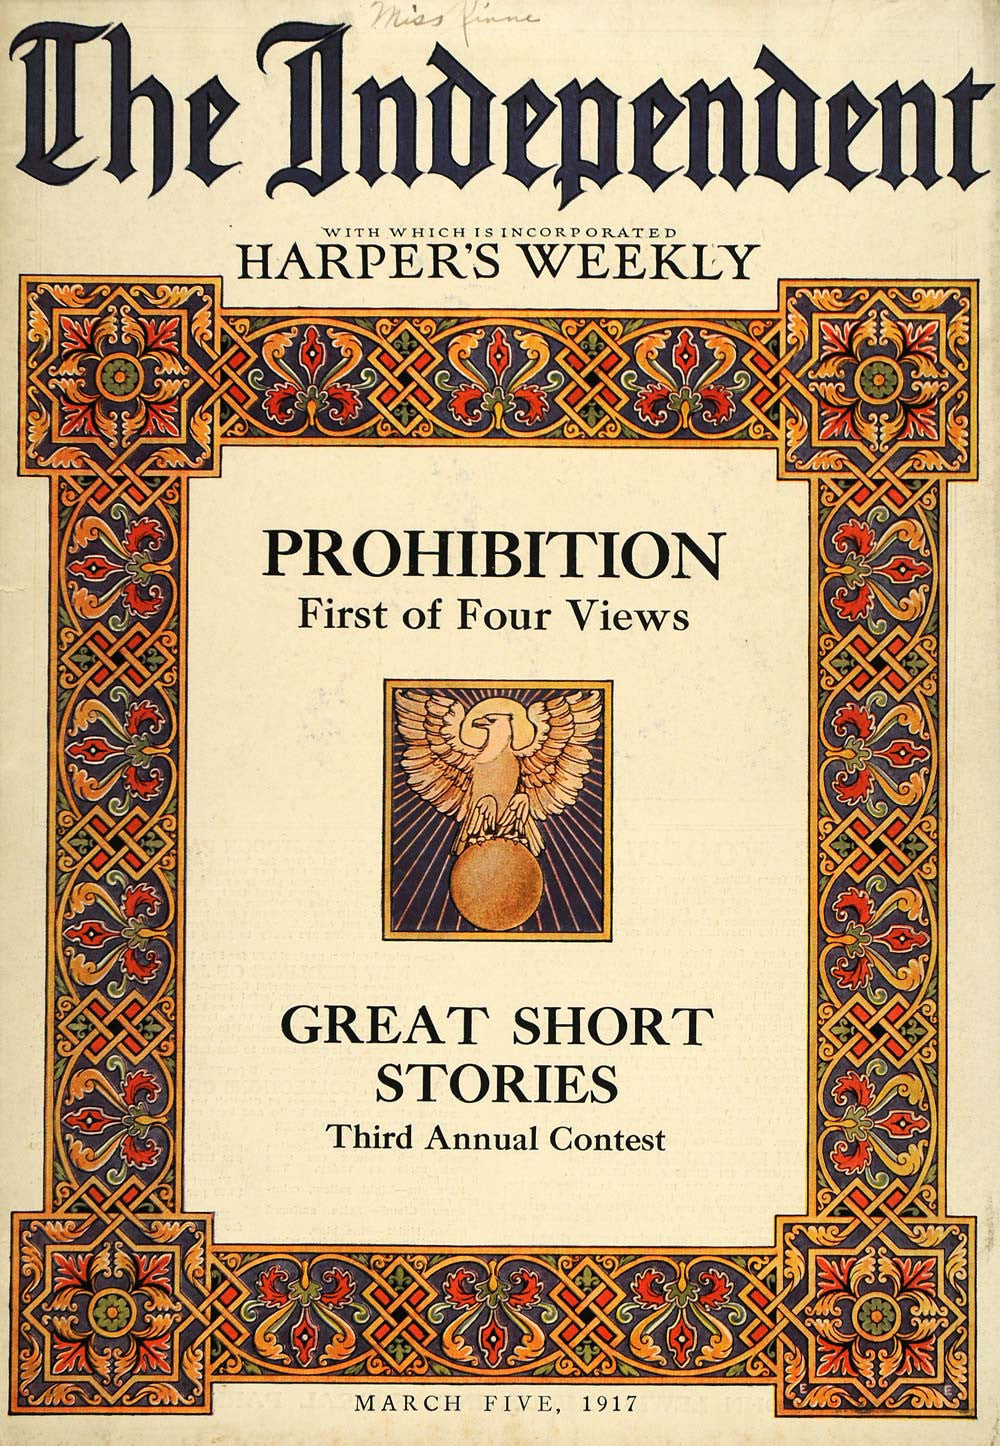 1917 Cover Independent Harpers Weekly Prohibition Views - ORIGINAL TIN2